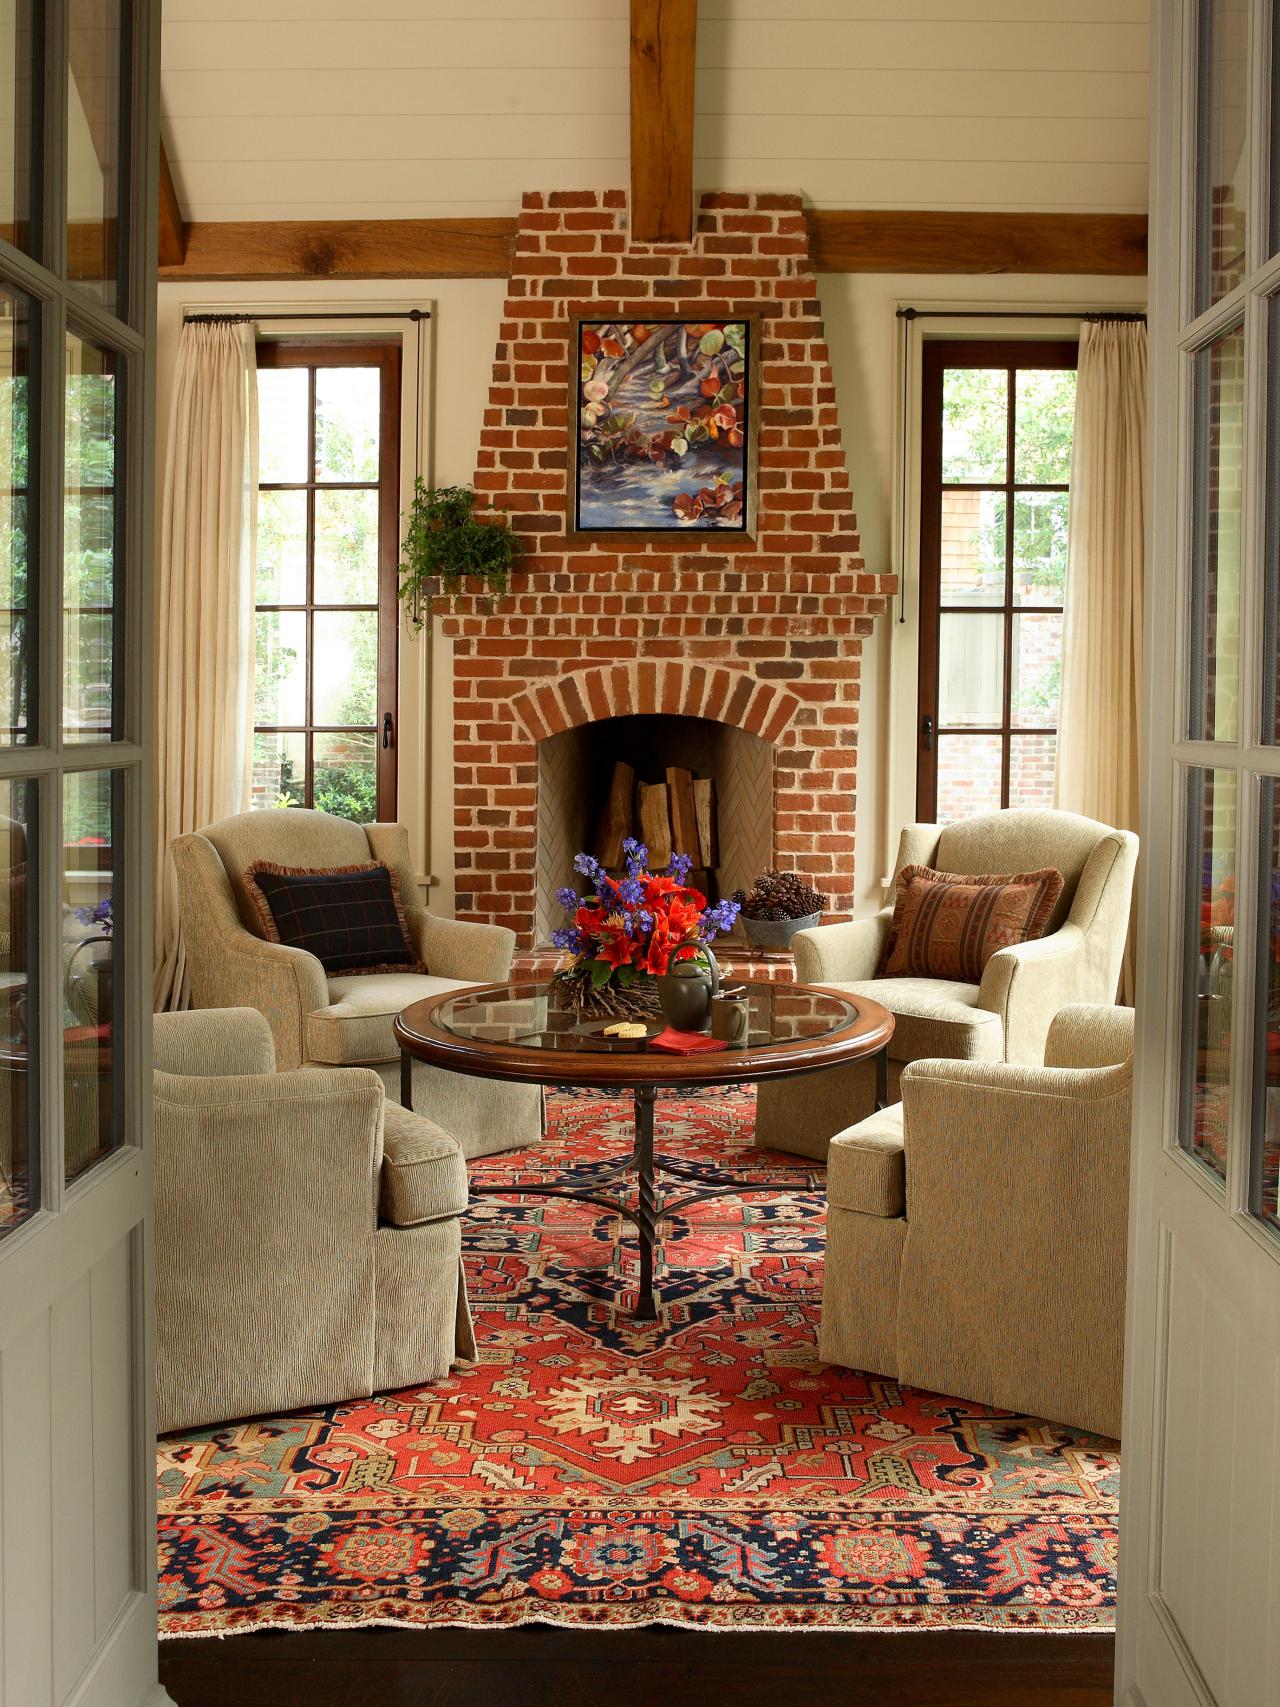 40 Beautiful Living Room Designs With Fireplace - Interior ...